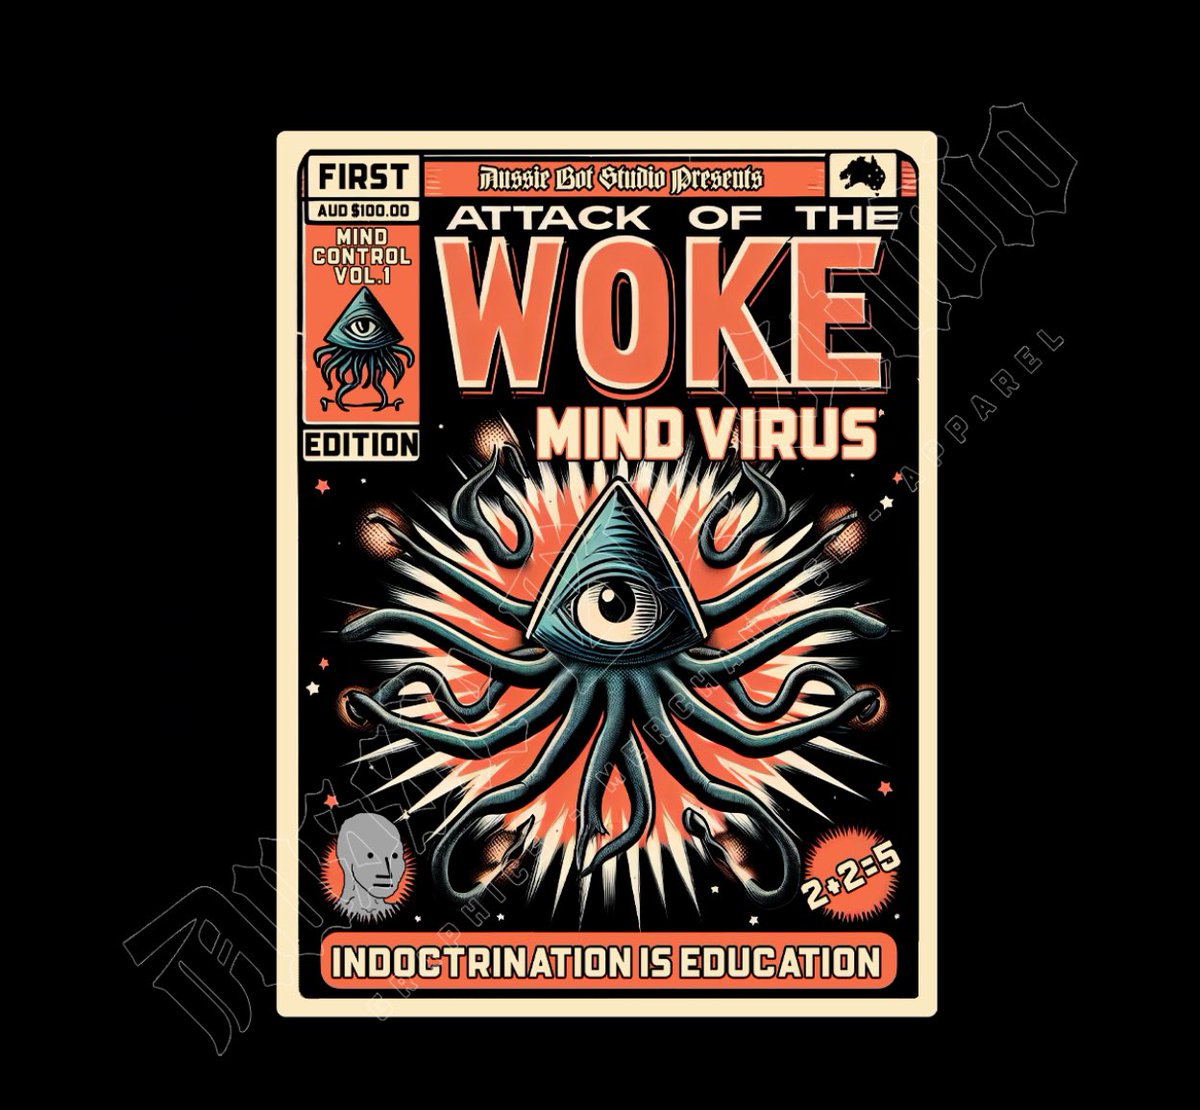 Attack of the Woke Mind Virus. 
Tees & Hoodies started shipping out today. Link in comments. 👇😁